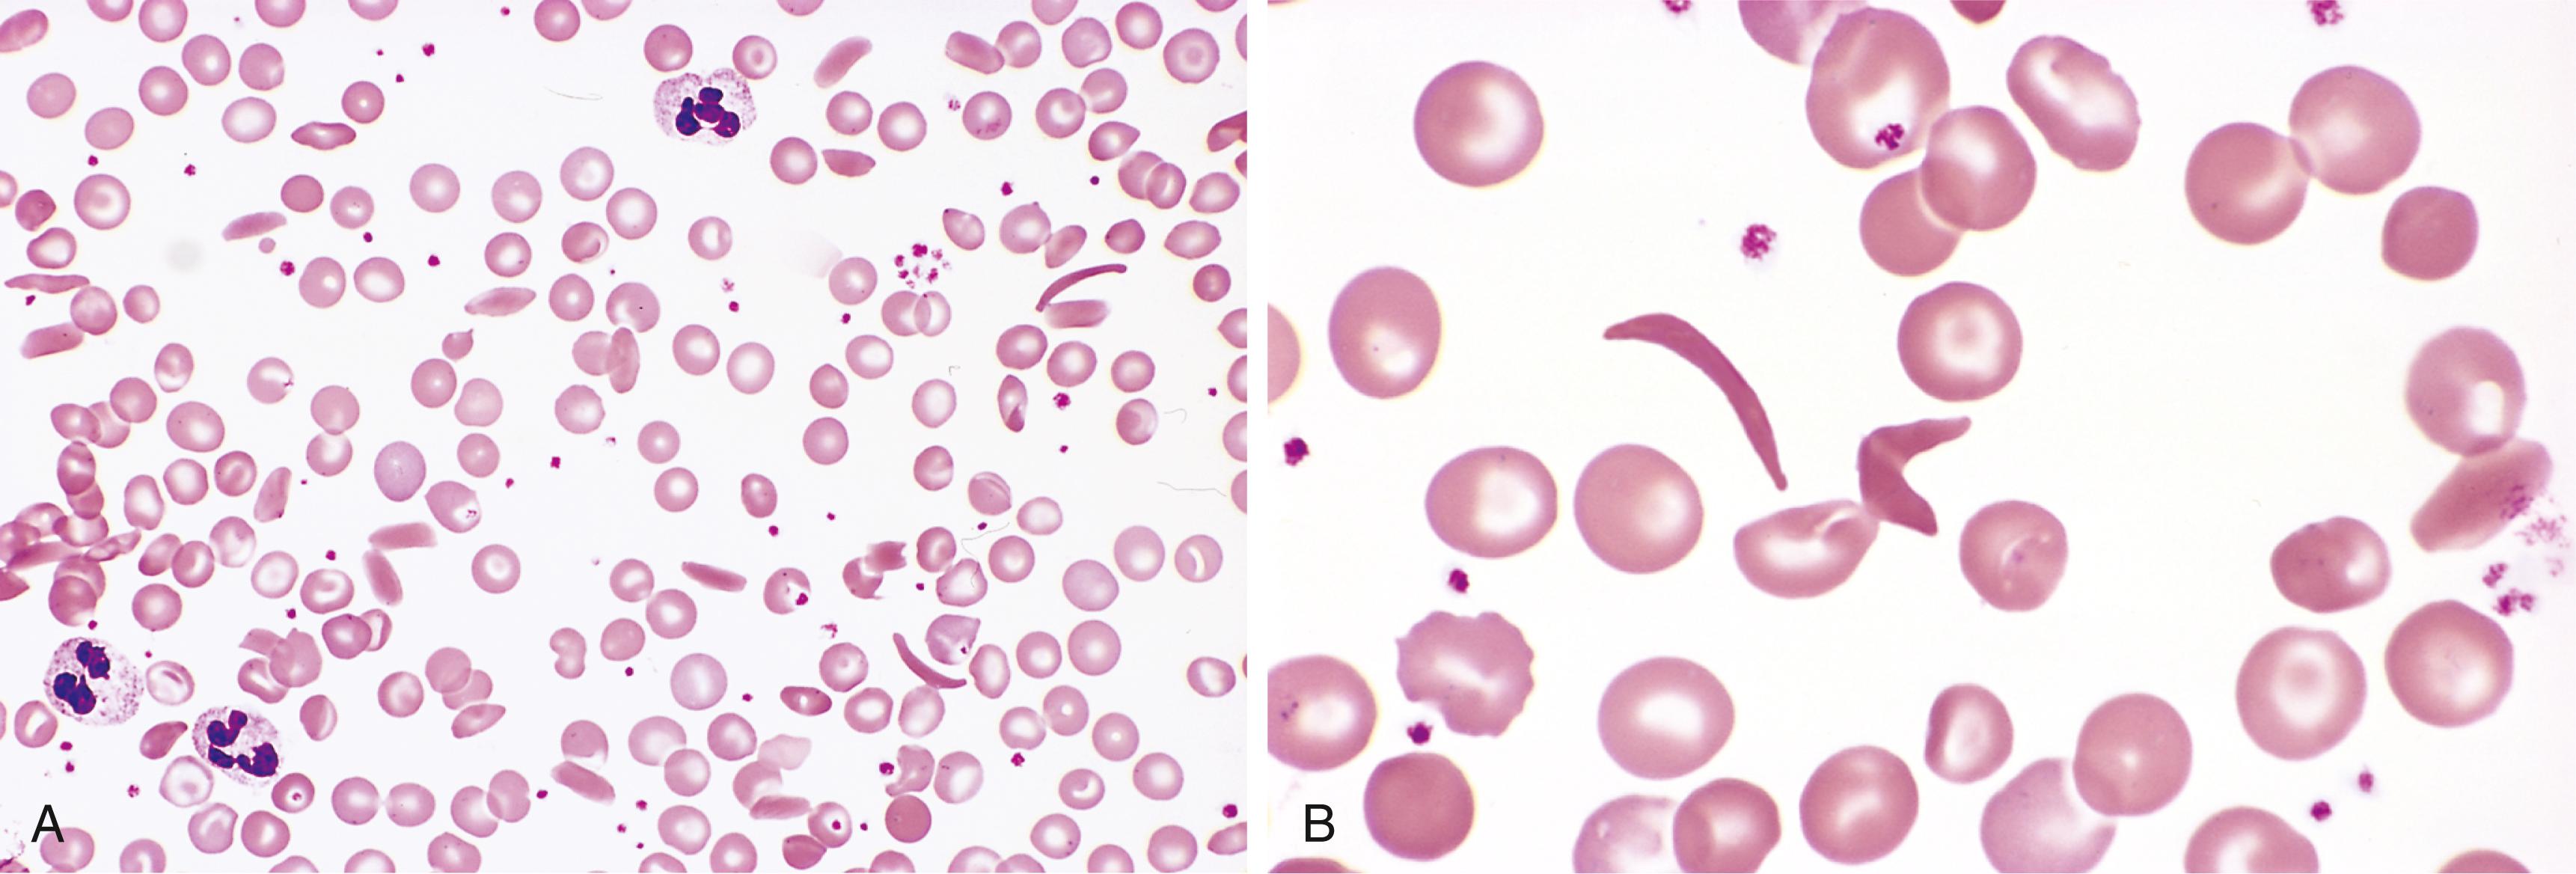 FIG. 10.3, Sickle cell anemia—peripheral blood smear. (A) Low magnification shows sickle cells, anisocytosis, poikilocytosis, and target cells. (B) Higher magnification shows two irreversibly sickled cells in the center.